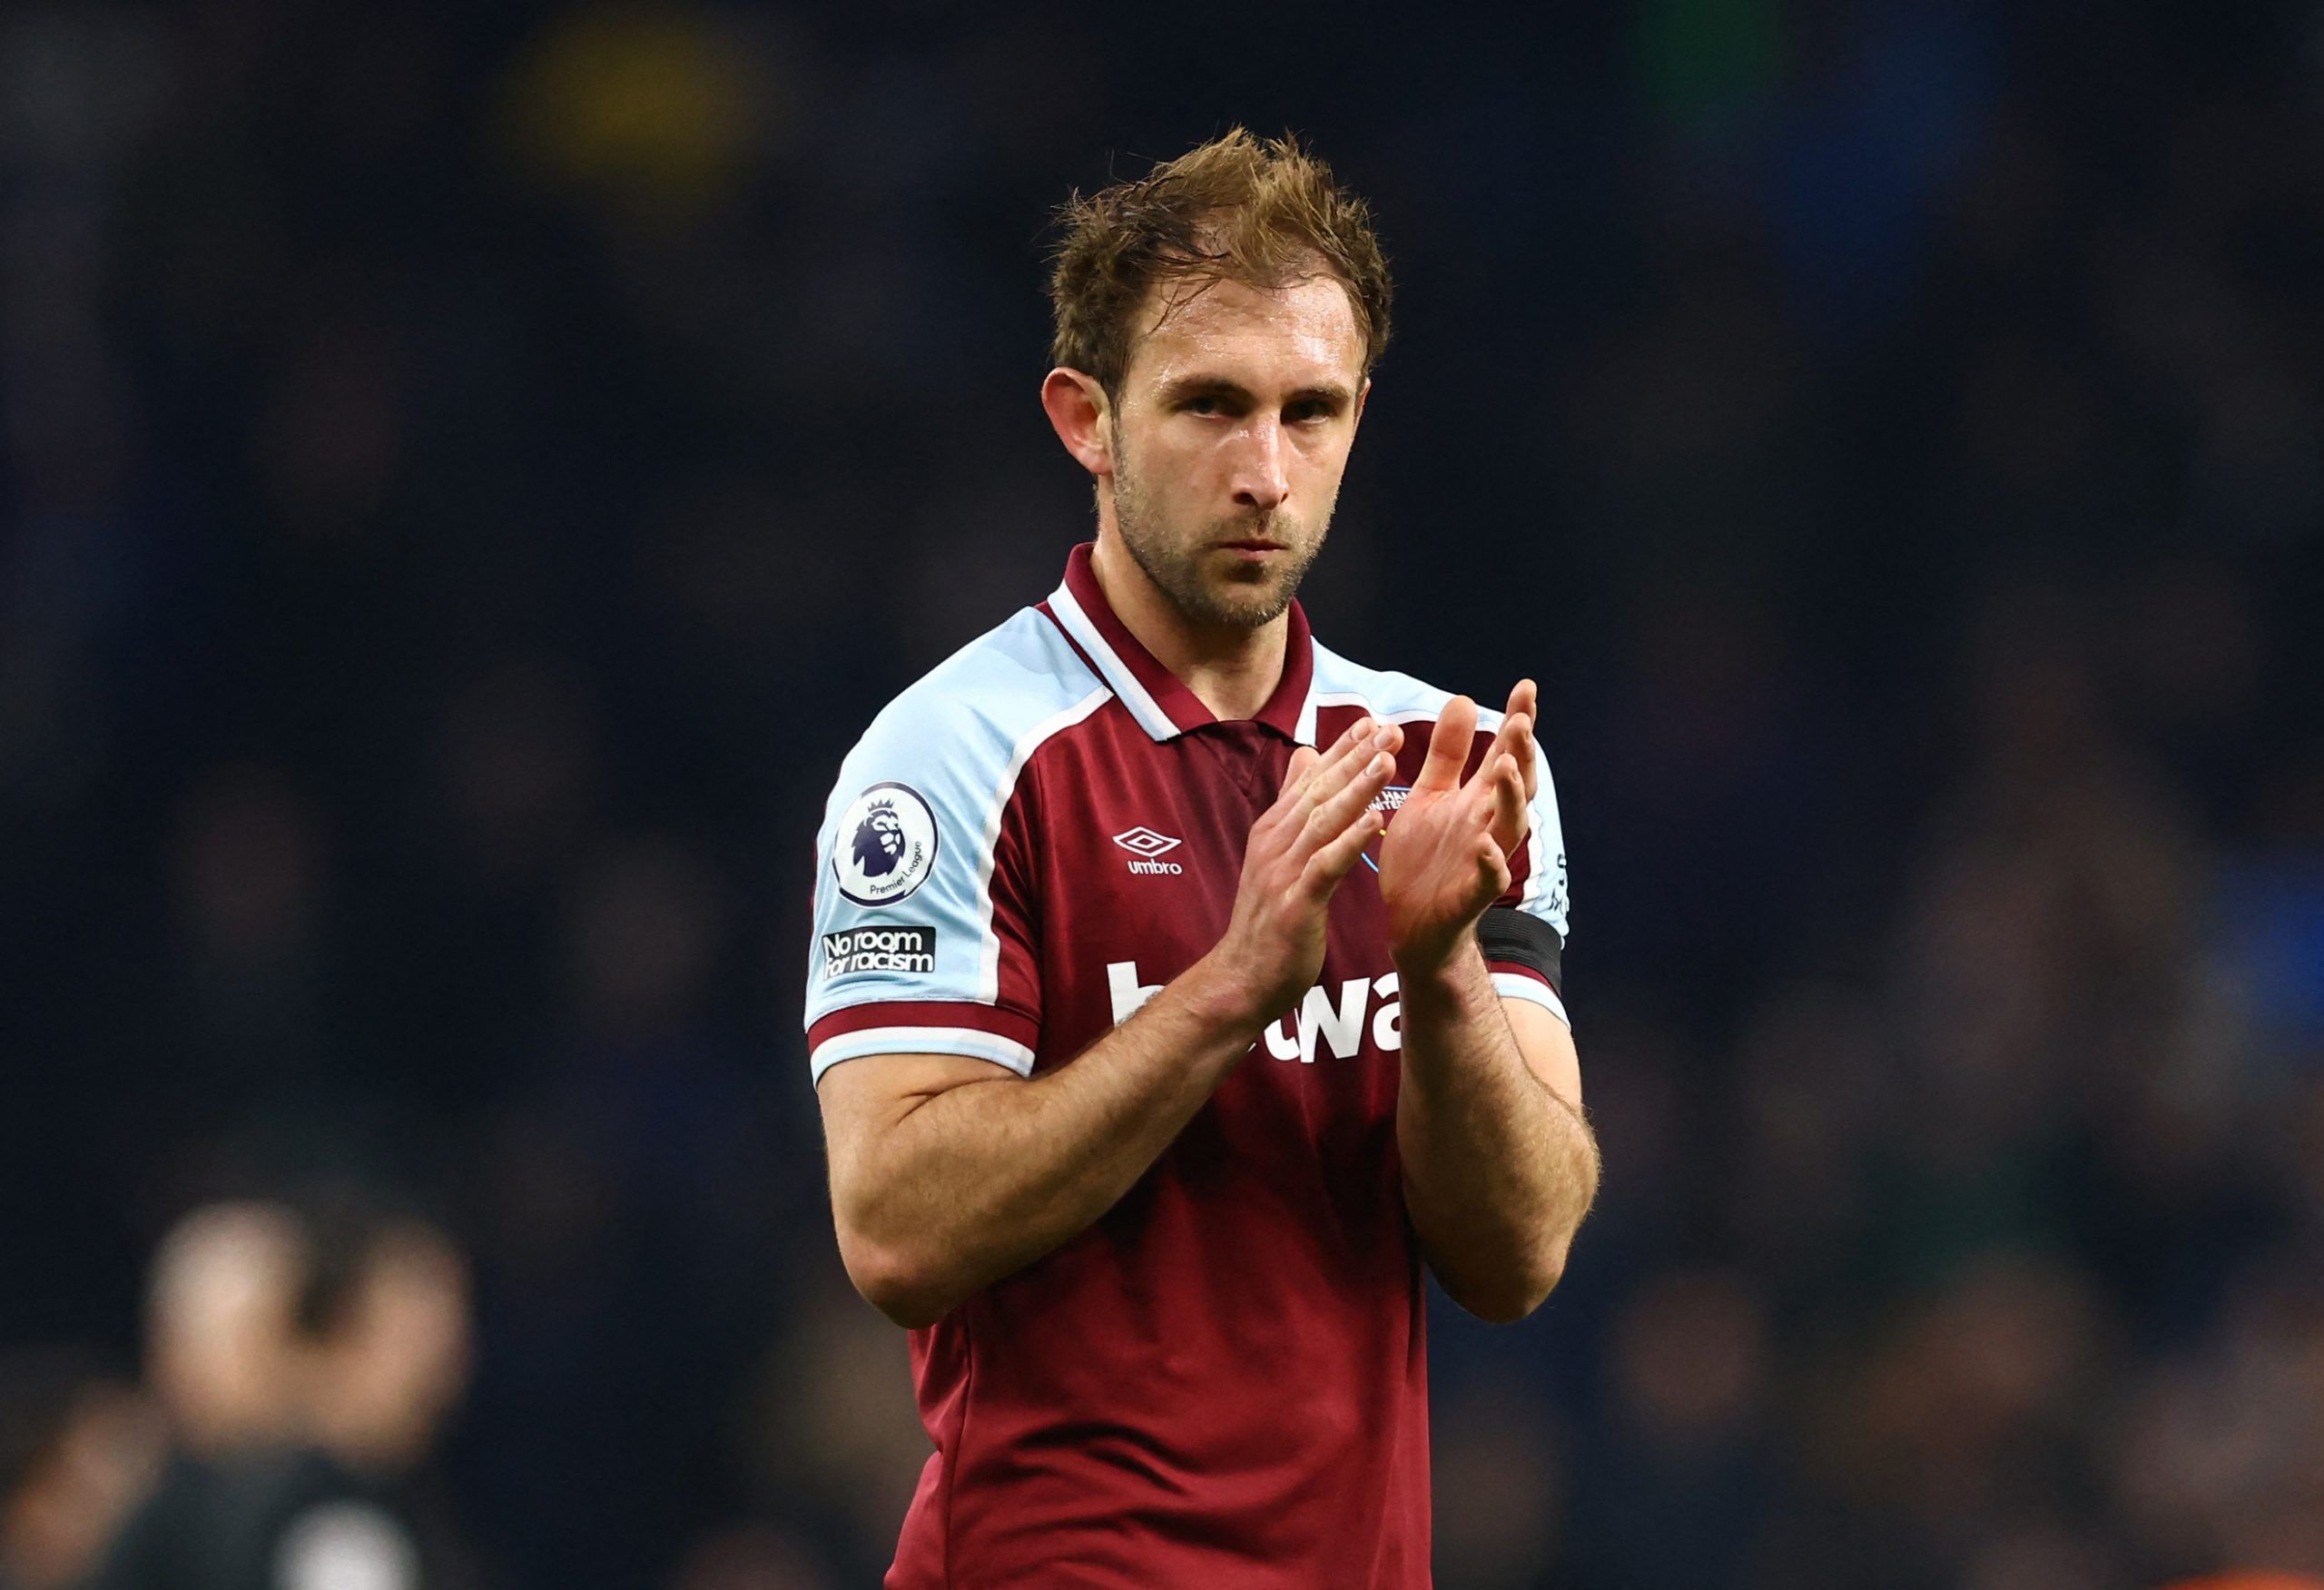 West Ham: David Moyes faces ‘tricky’ situation with Craig Dawson’s wish to leave -West Ham News